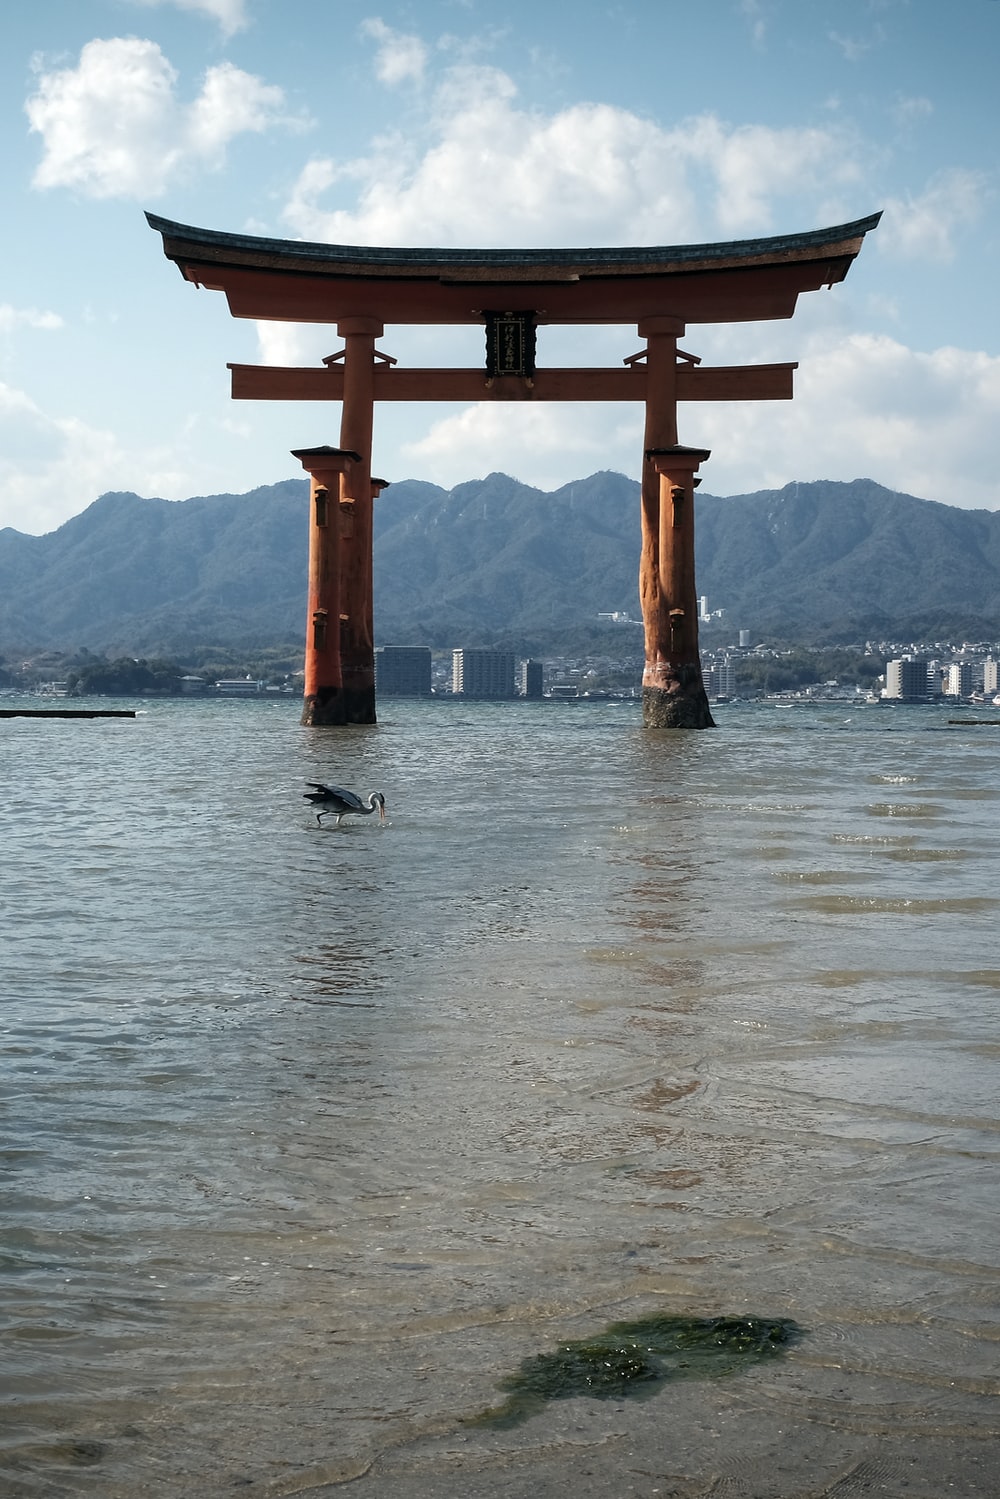 Torii Gate Picture. Download Free Image